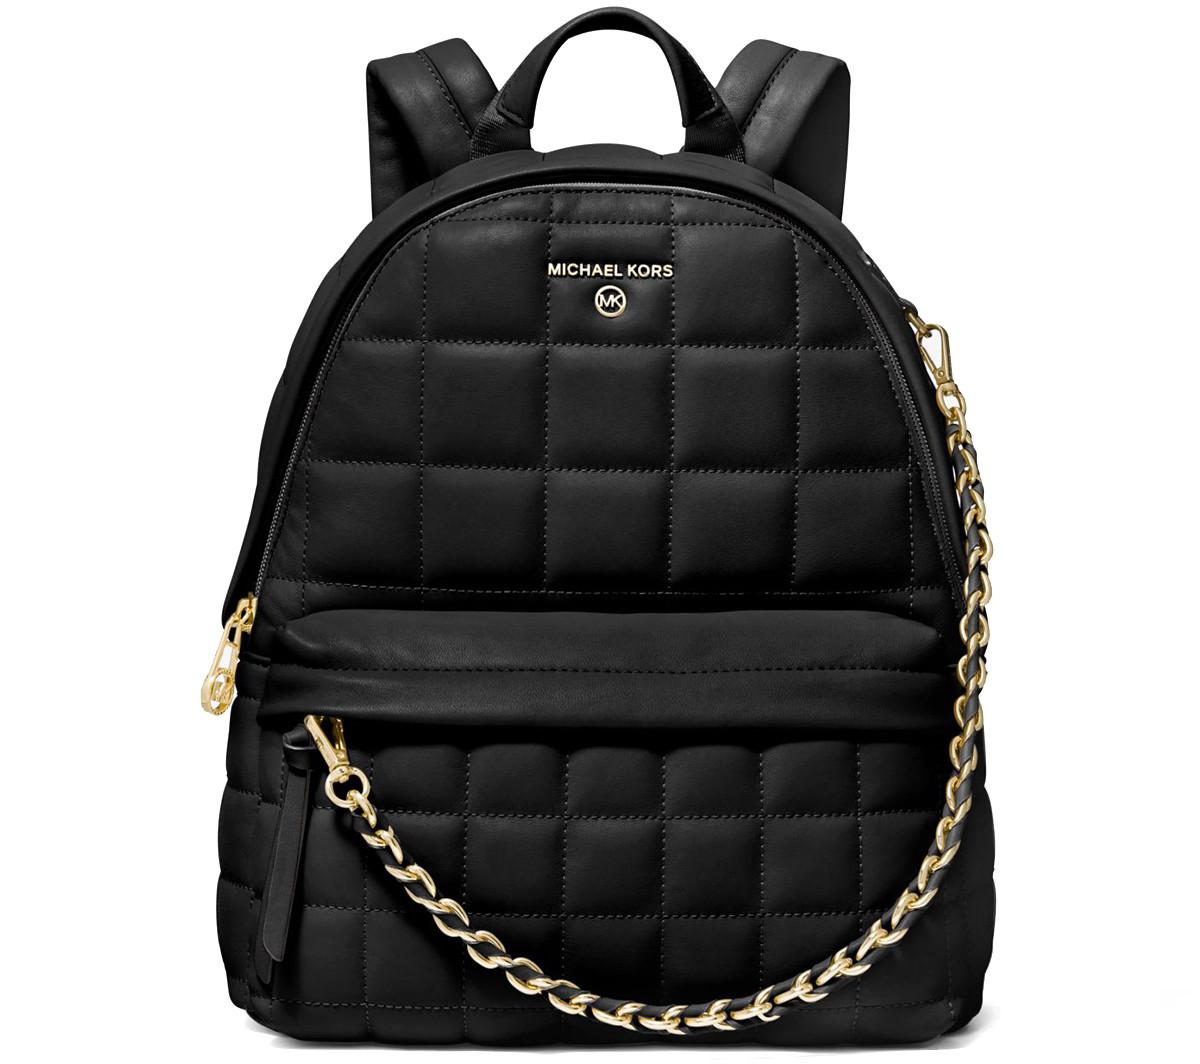 Michael Kors Black Quilted Leather Slater Medium Backpack at FORZIERI Canada